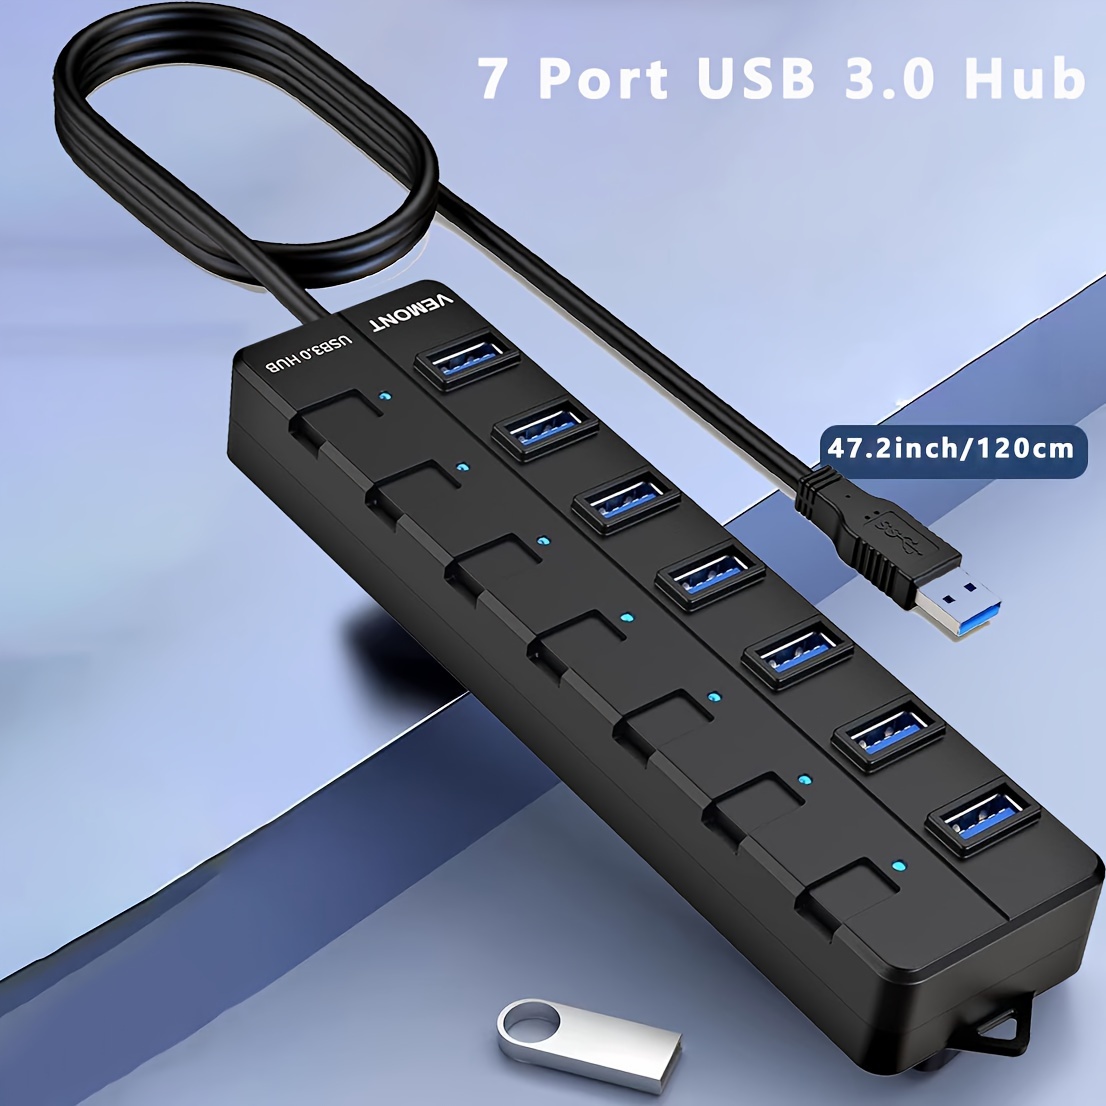 

Usb , 7 Port Usb 3.0 , Fpozuo Usb Splitter With Individual On/off Switches And Lights, 4ft/1.2m Usb Long Cable, Usb Extension For Laptop And Pc Computer